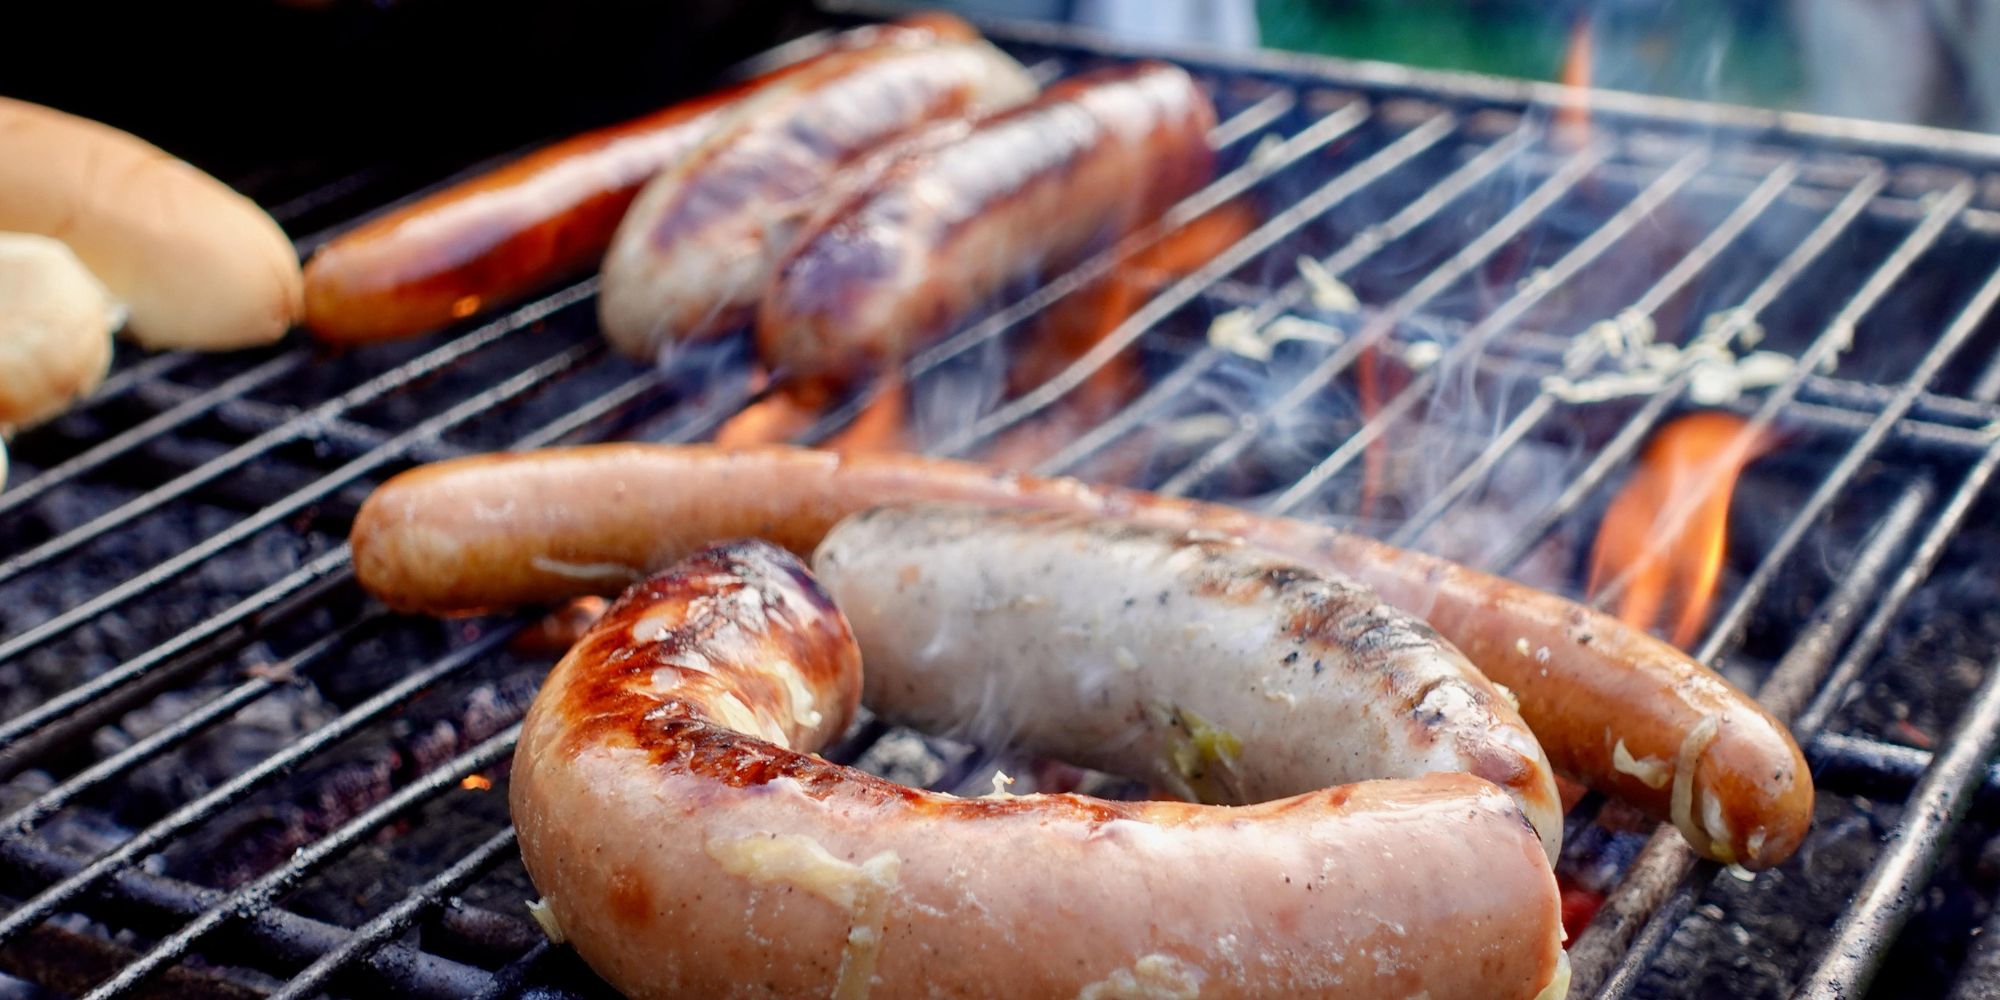 how-to-grill-uncooked-sausage